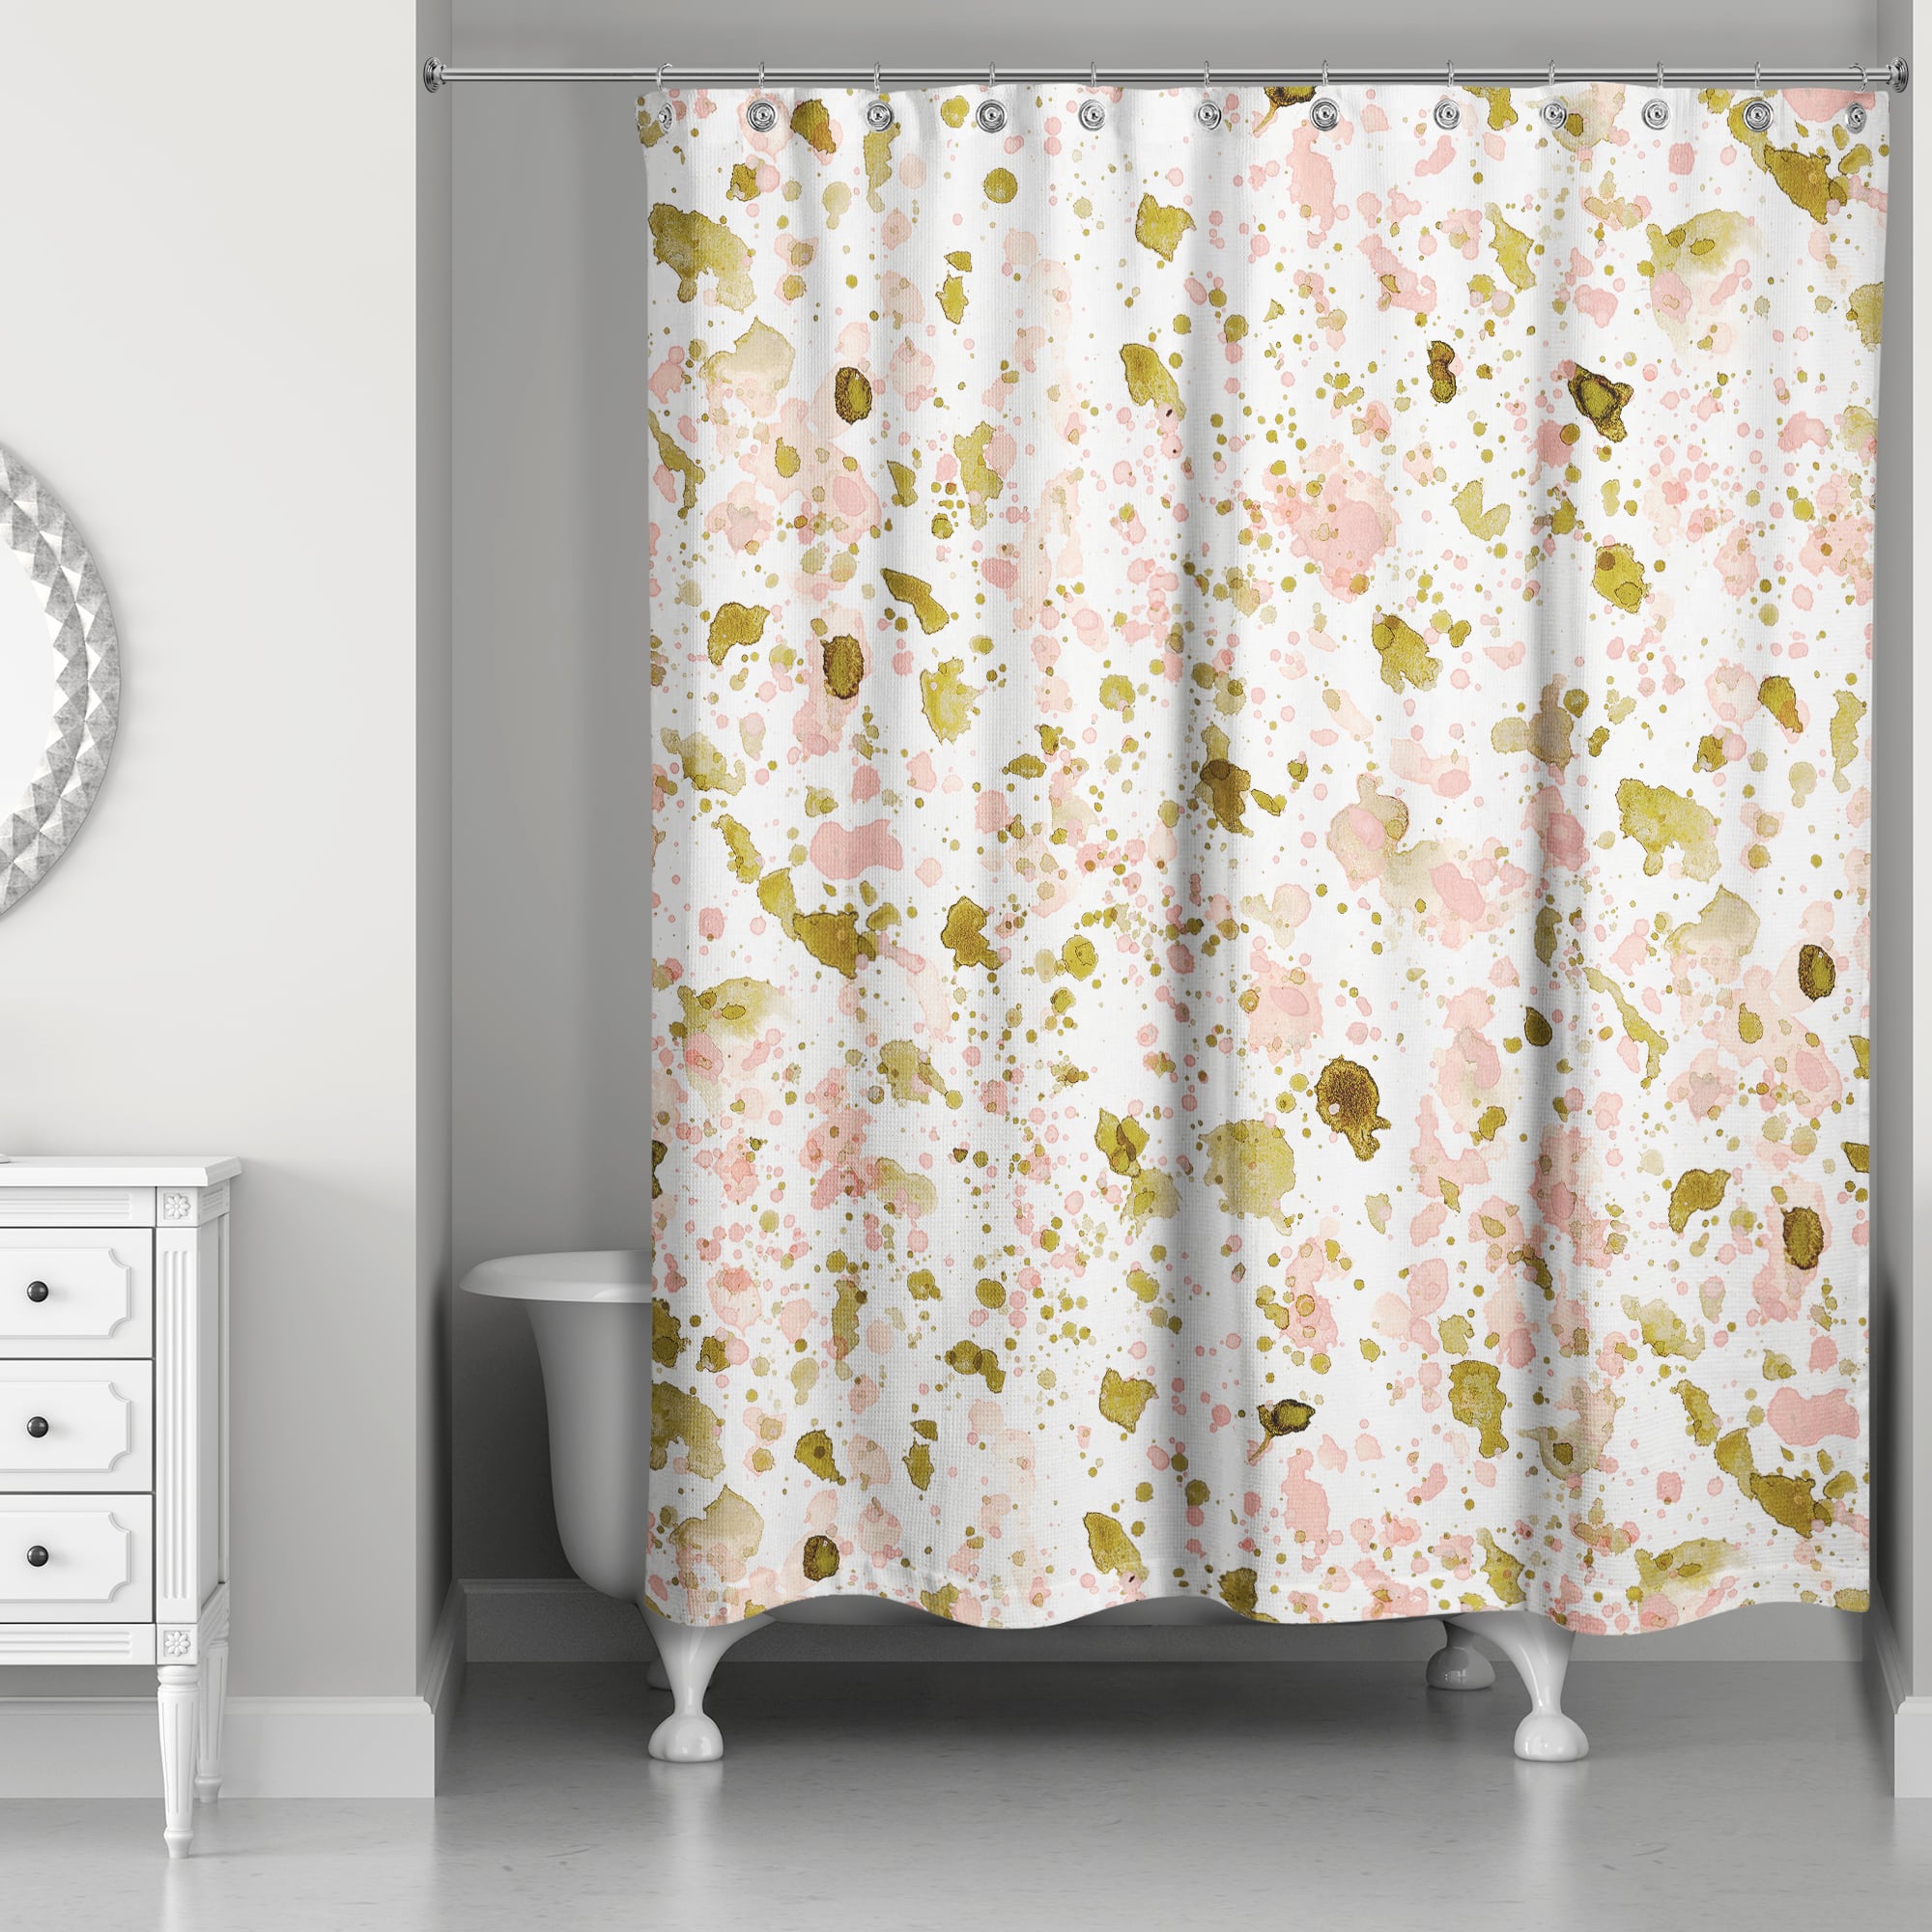 Speckled Shower Curtain